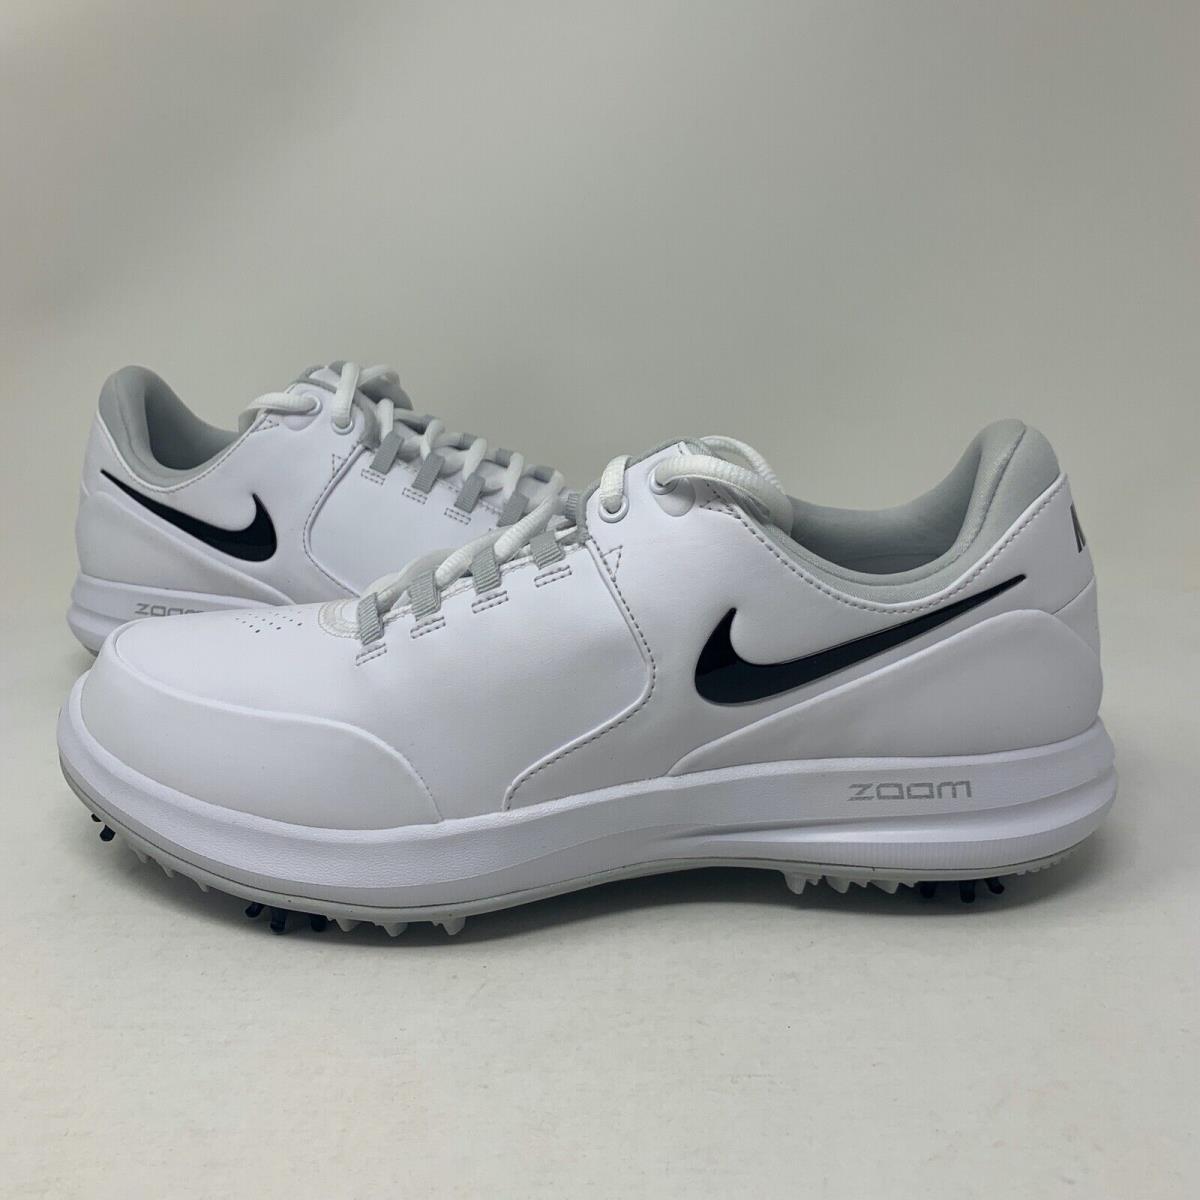 Nike Air Zoom Accurate Golf Shoes Size 10 Wide | 883212504845 - Nike shoes Air Zoom Accurate - White | SporTipTop